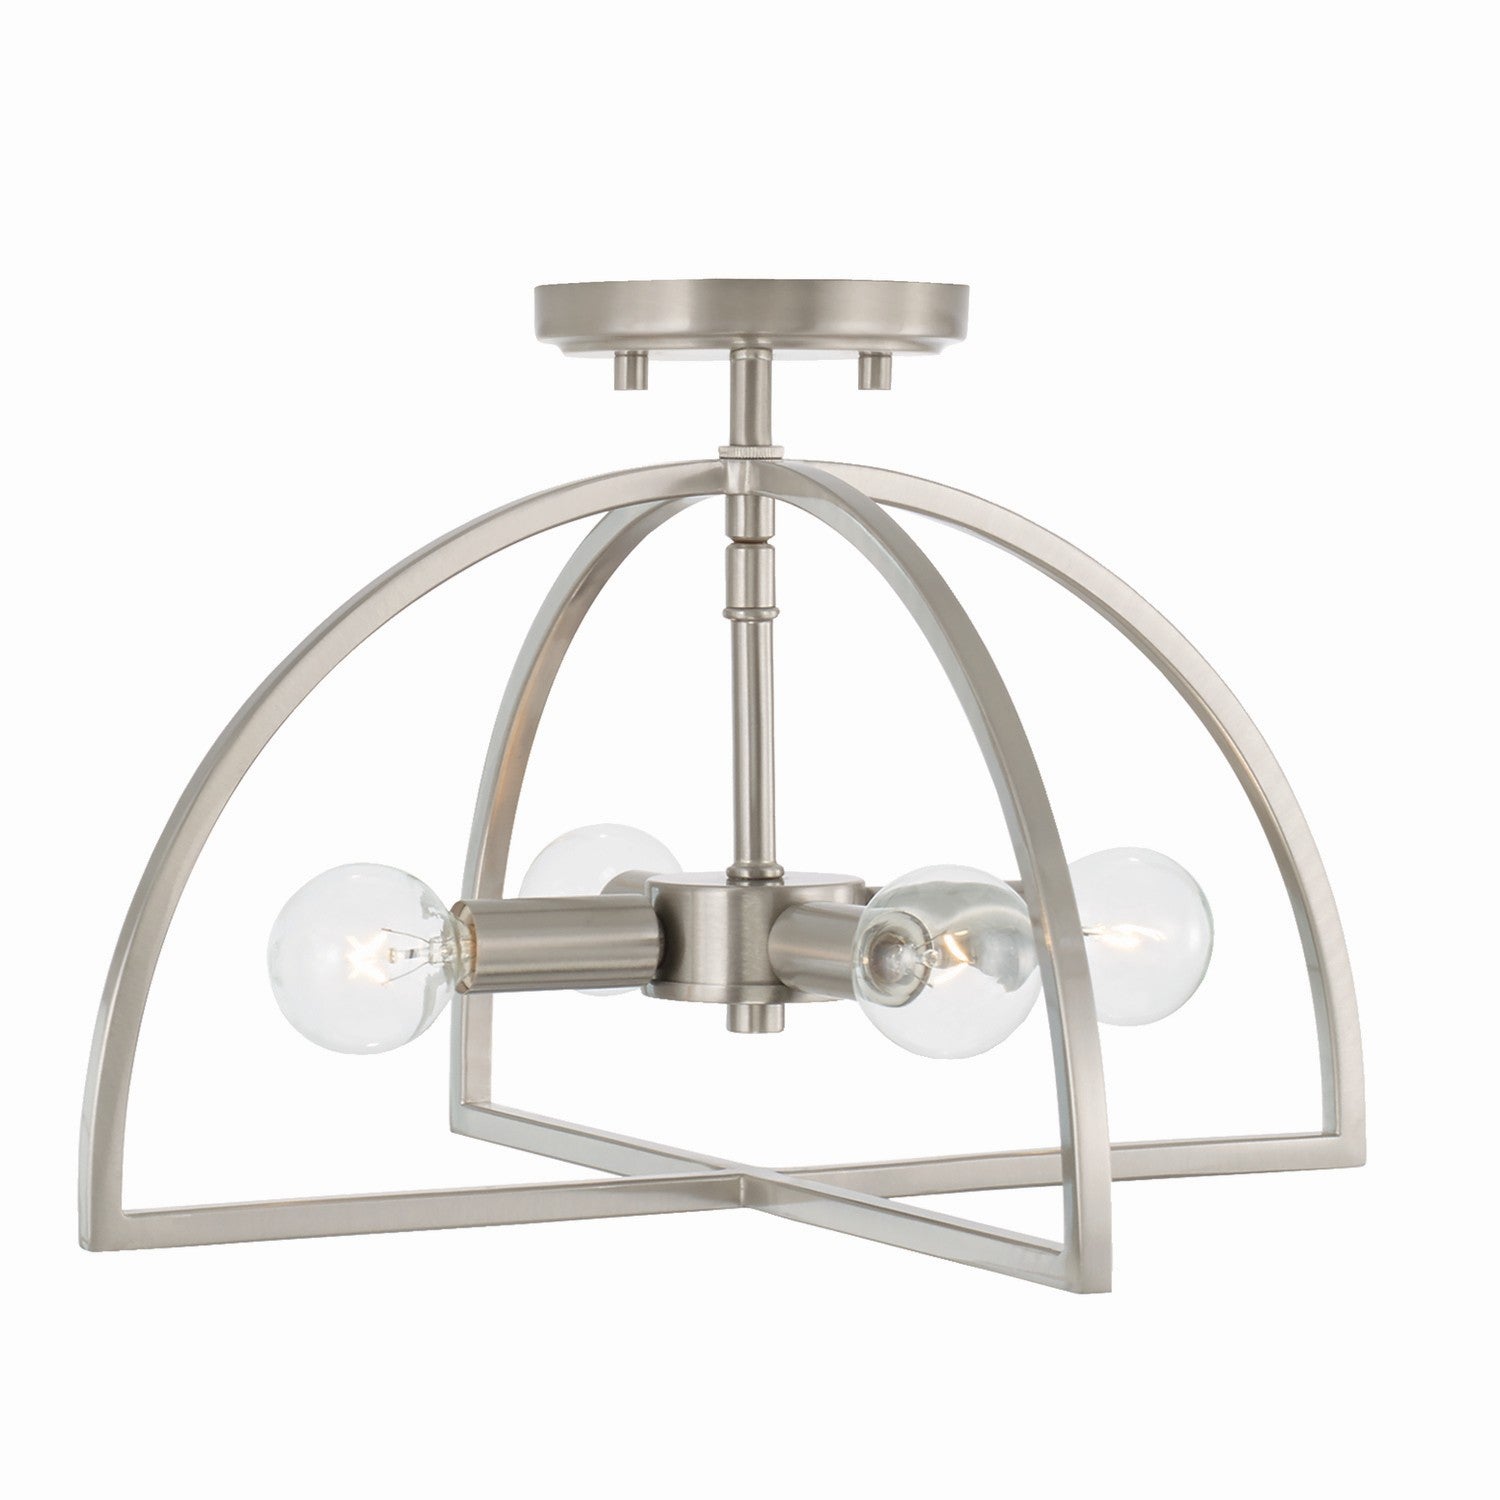 Capital Lawson 248841BN Ceiling Light - Brushed Nickel